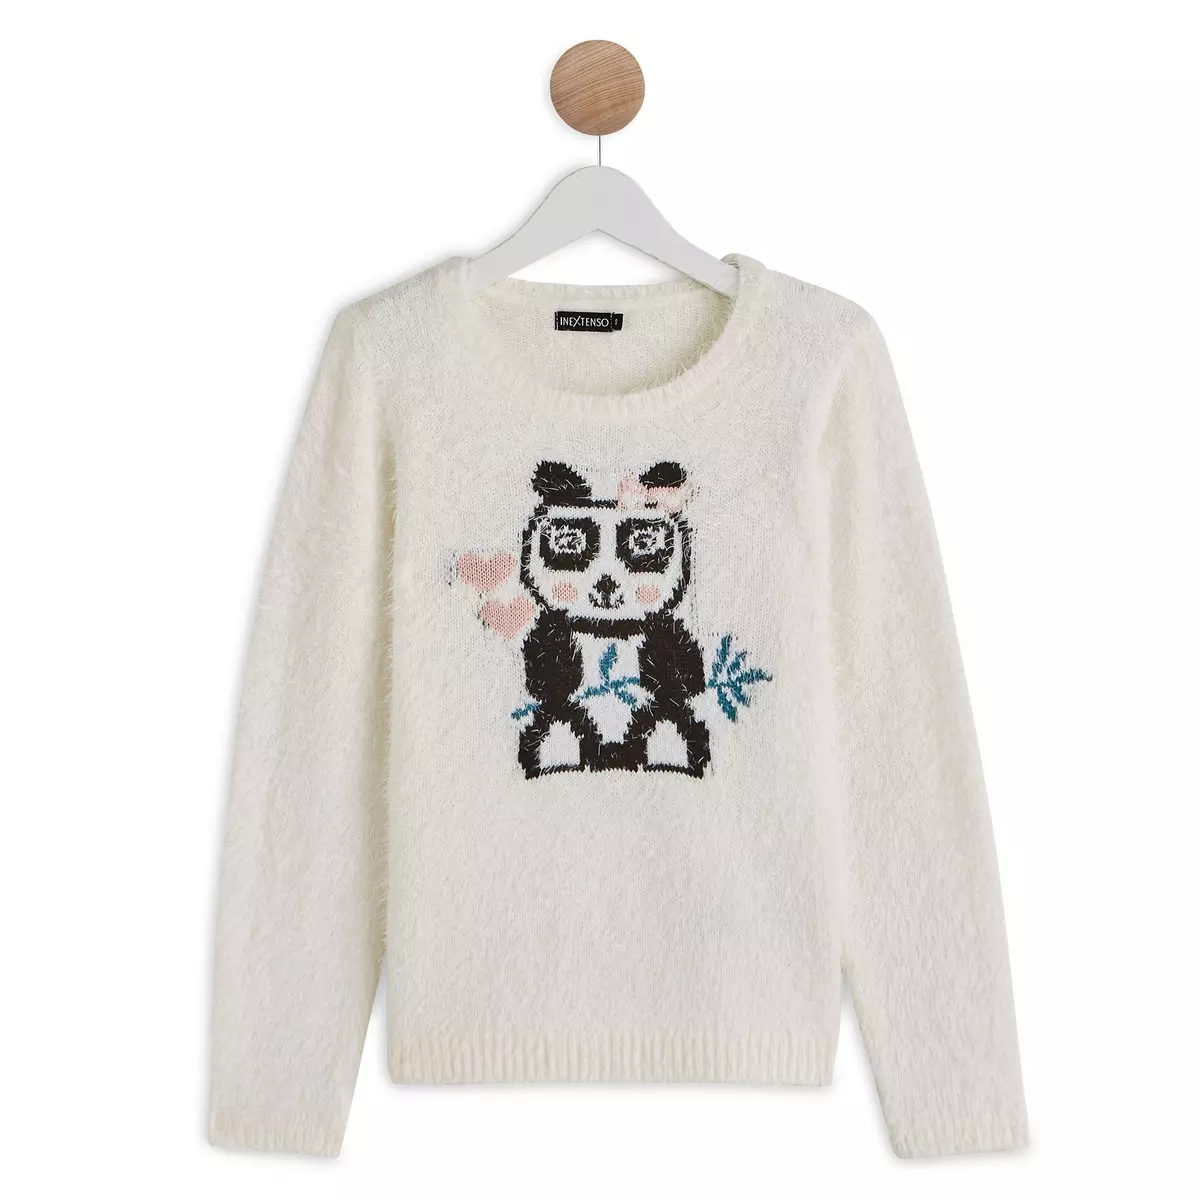 IN EXTENSO Pull jacquard panda fille